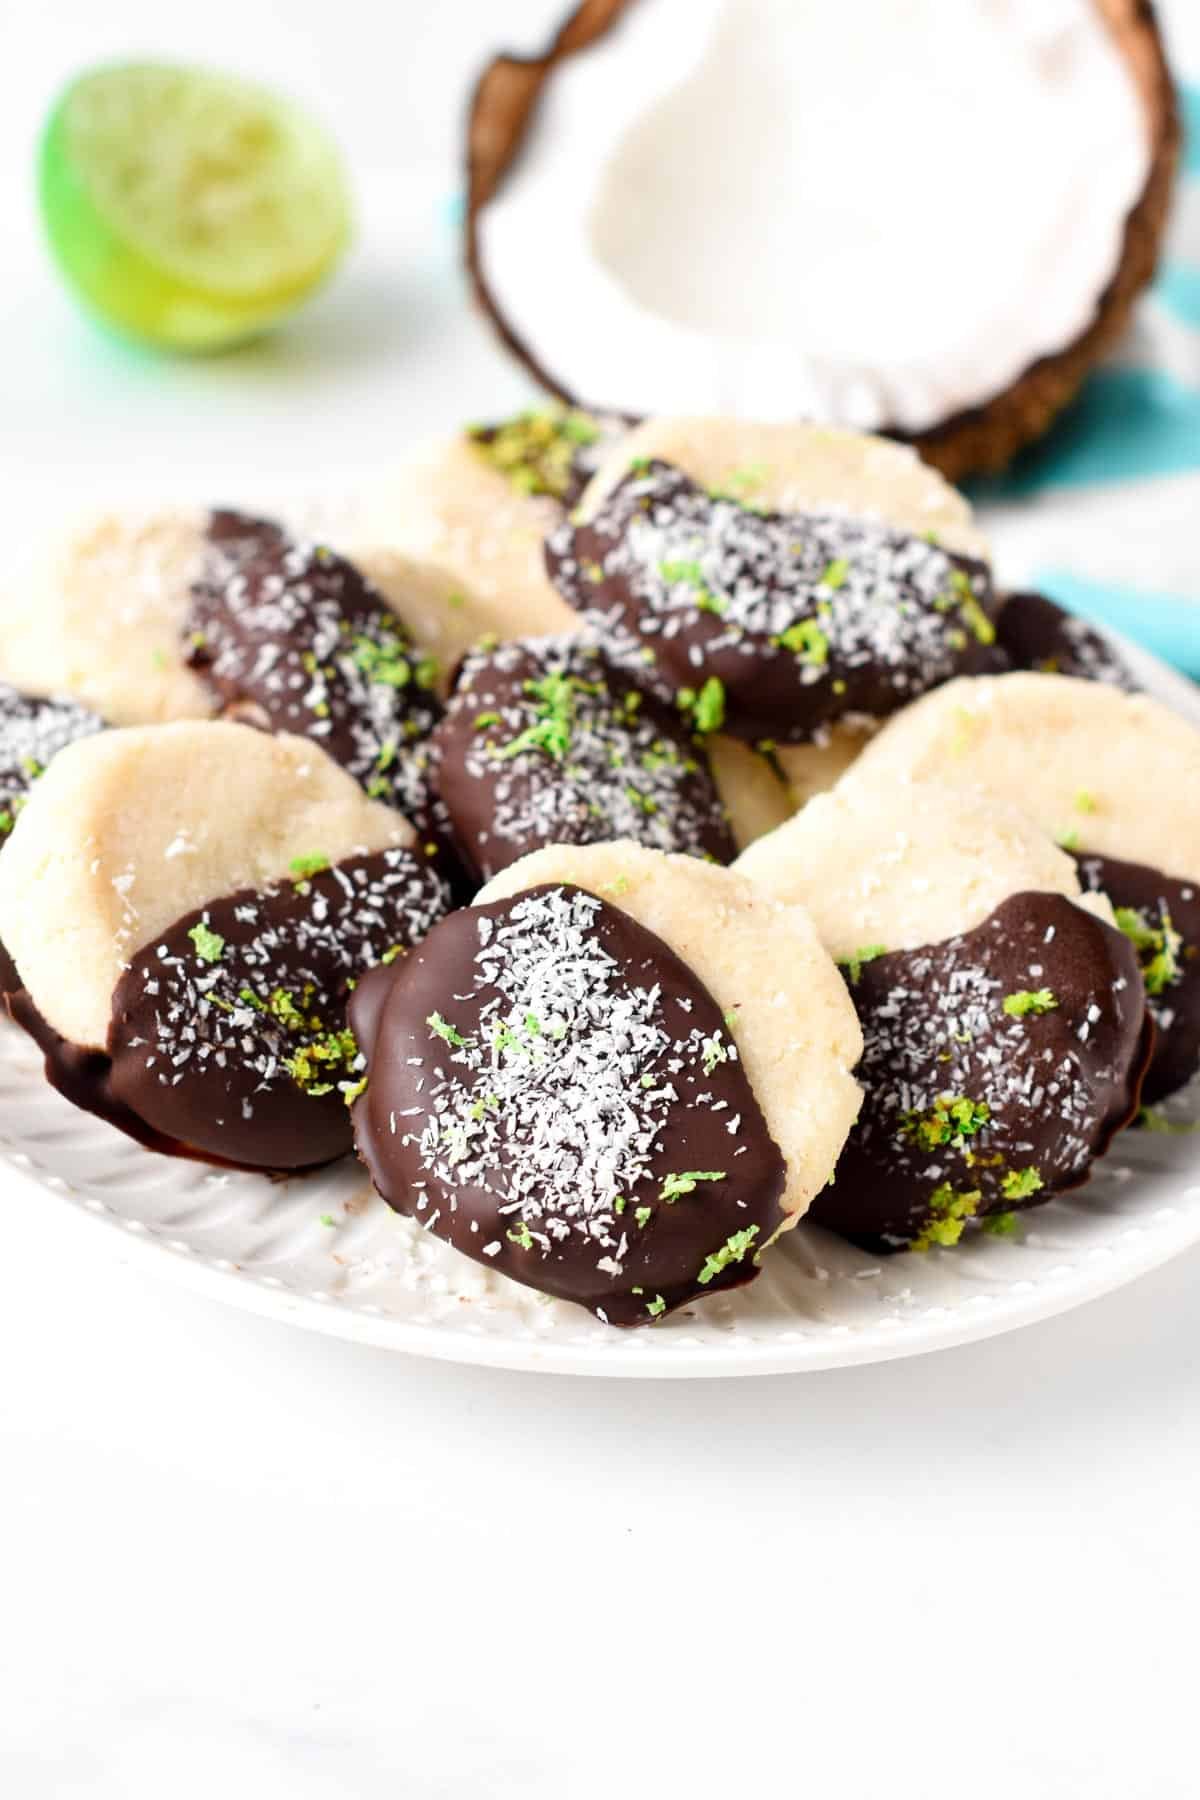 No-Bake Coconut Cookies decorated with chocolate, lime zest, and shredded coconut on a white plate.